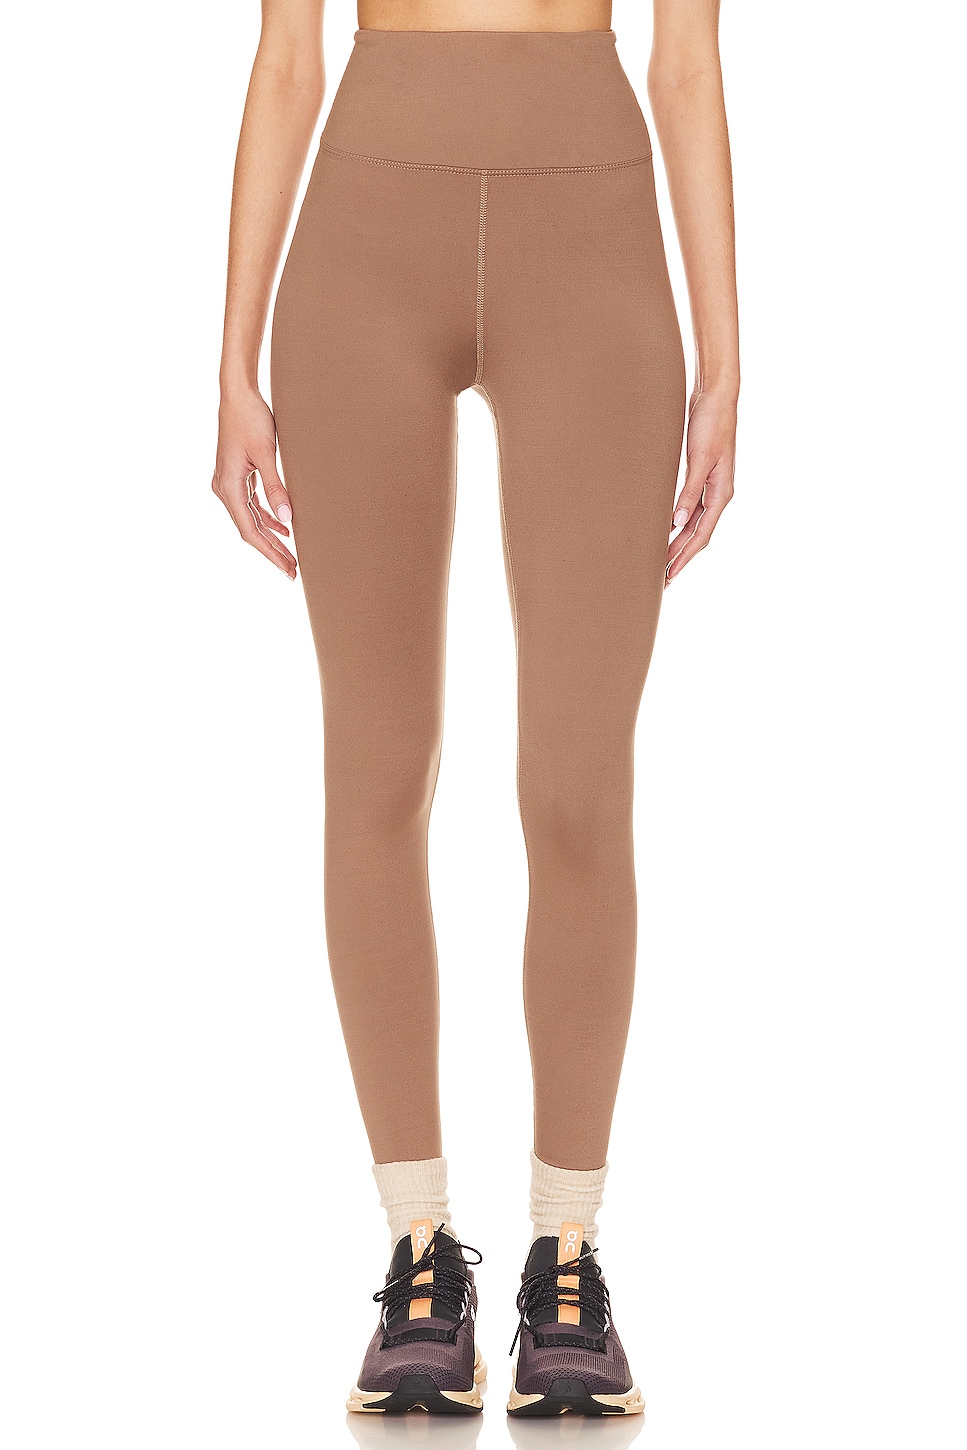 YEAR OF OURS Stretch Sculpt High Legging in Taupe